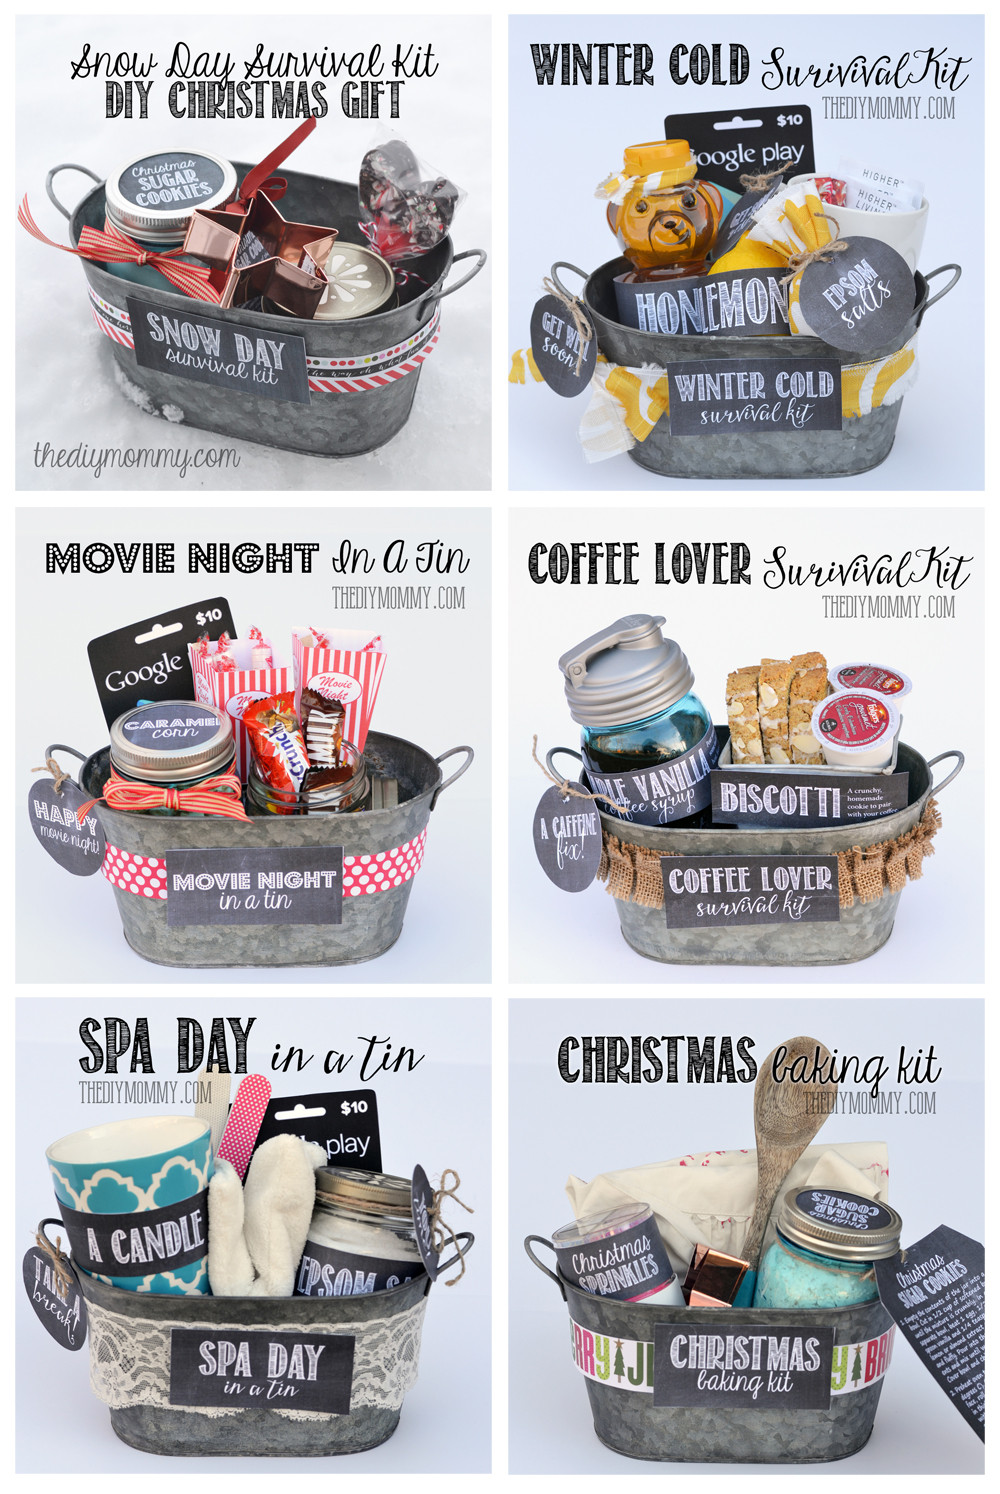 Christmas Baking Gifts
 A Gift in a Tin Christmas Baking Kit